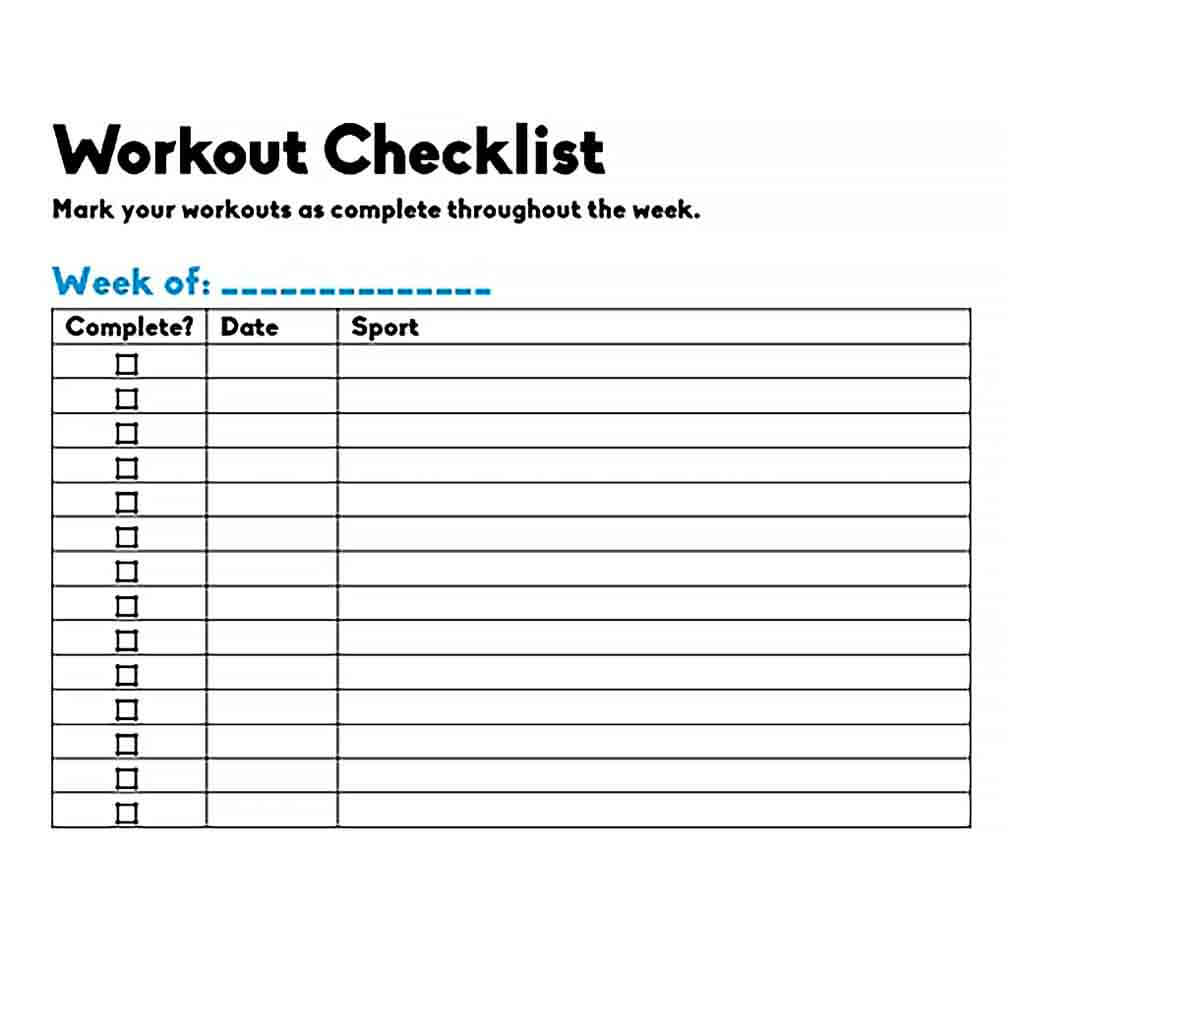 Sample Blank Workout Checklist Template